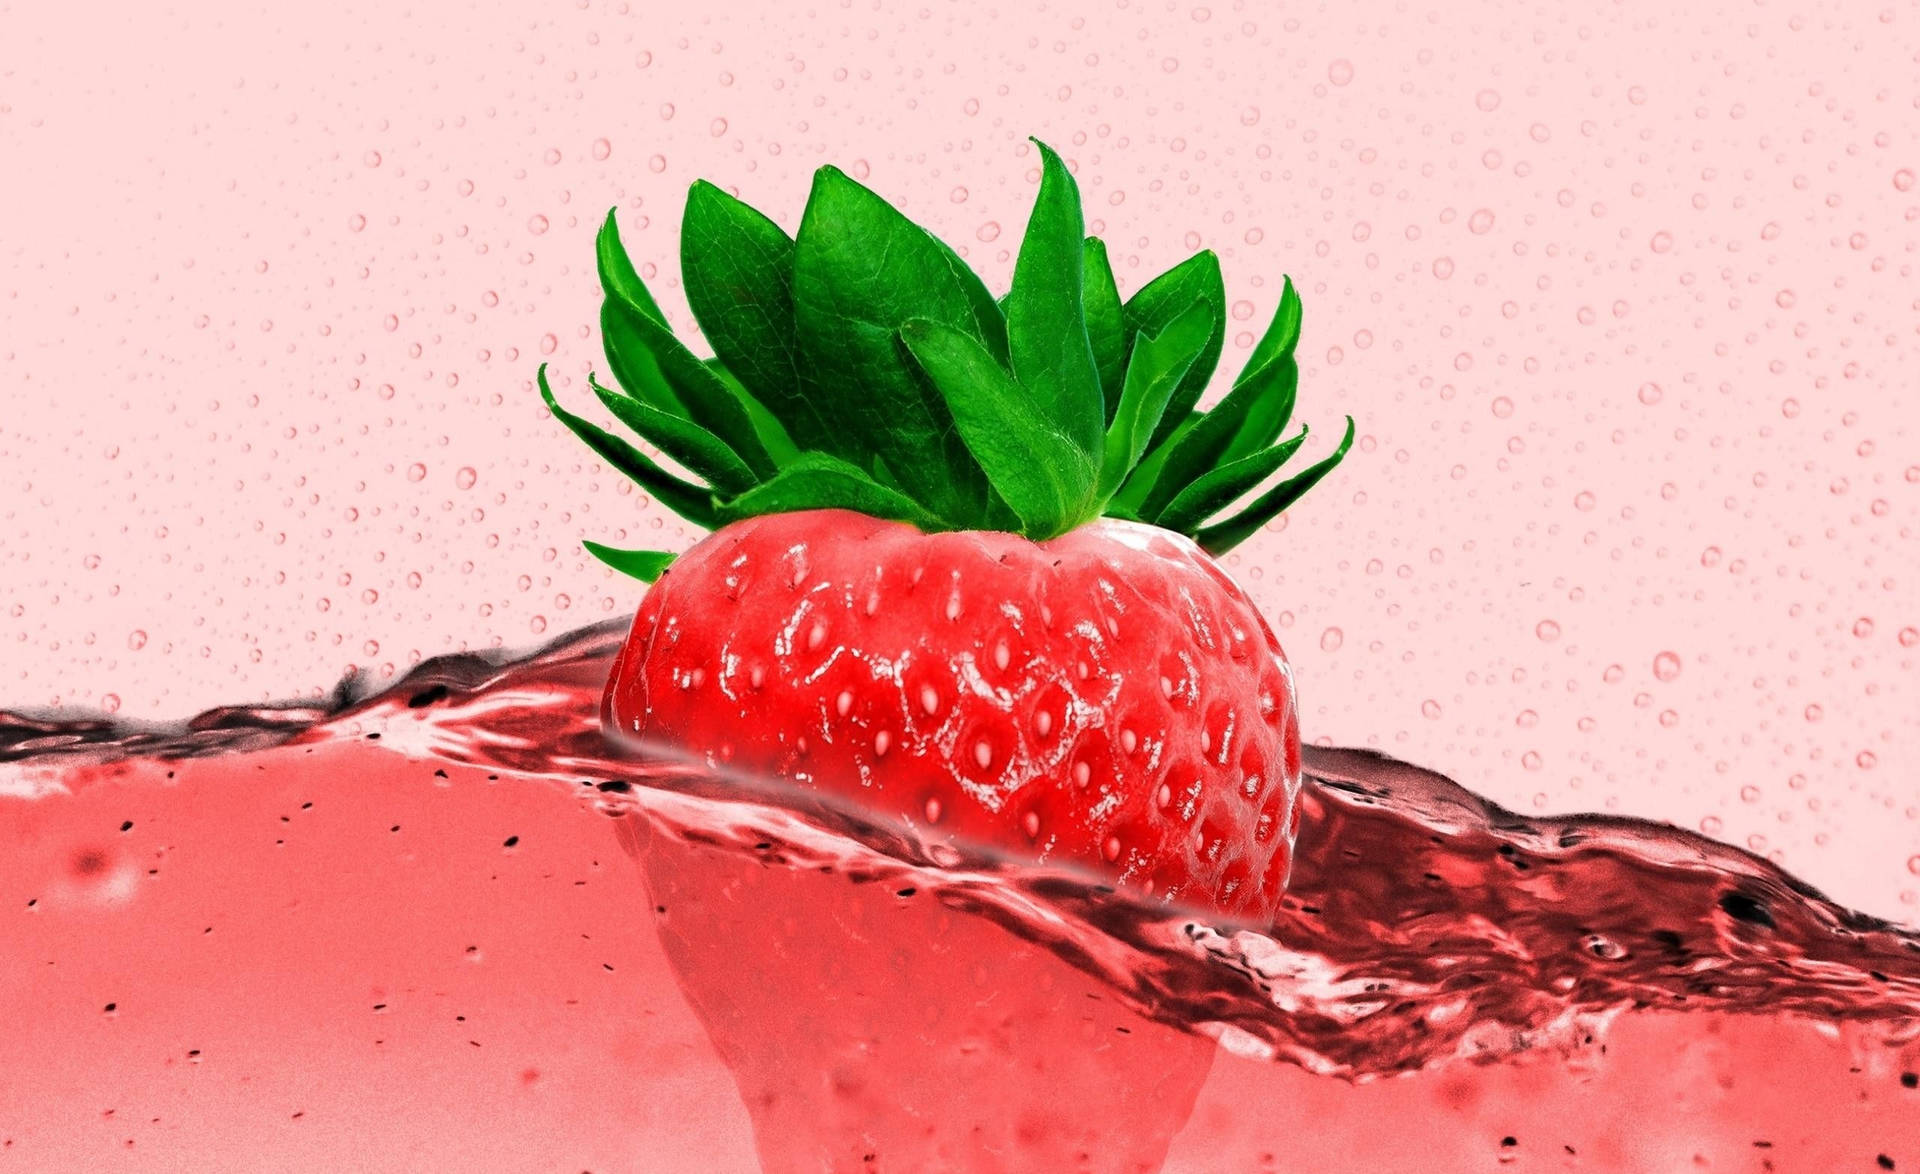 "Let sweet optimism fill every part of your soul with an energizing strawberry aesthetic!" Wallpaper